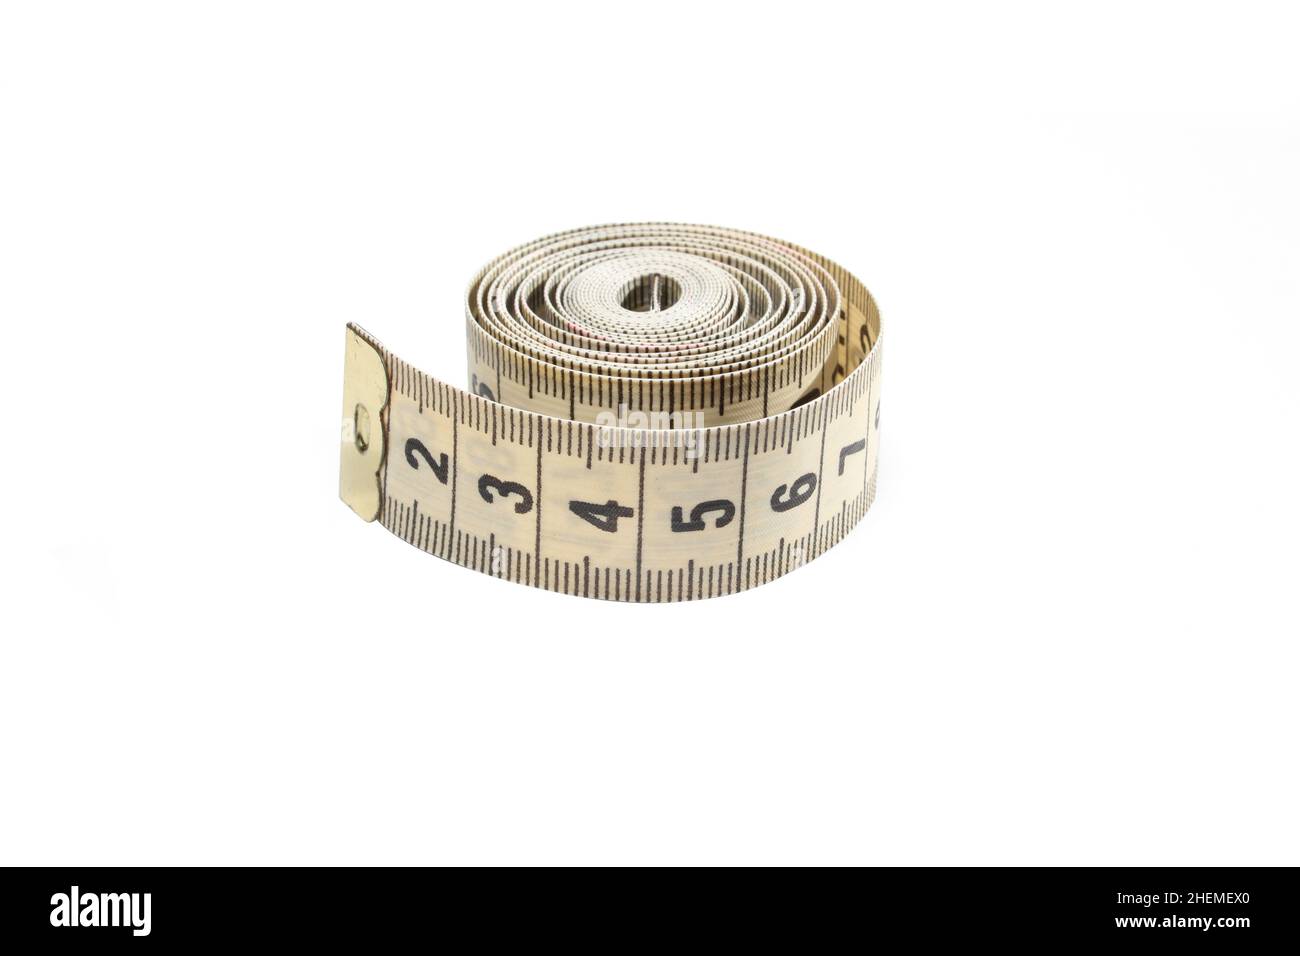 Measuring tape isolated on white background. Metric system Stock Photo